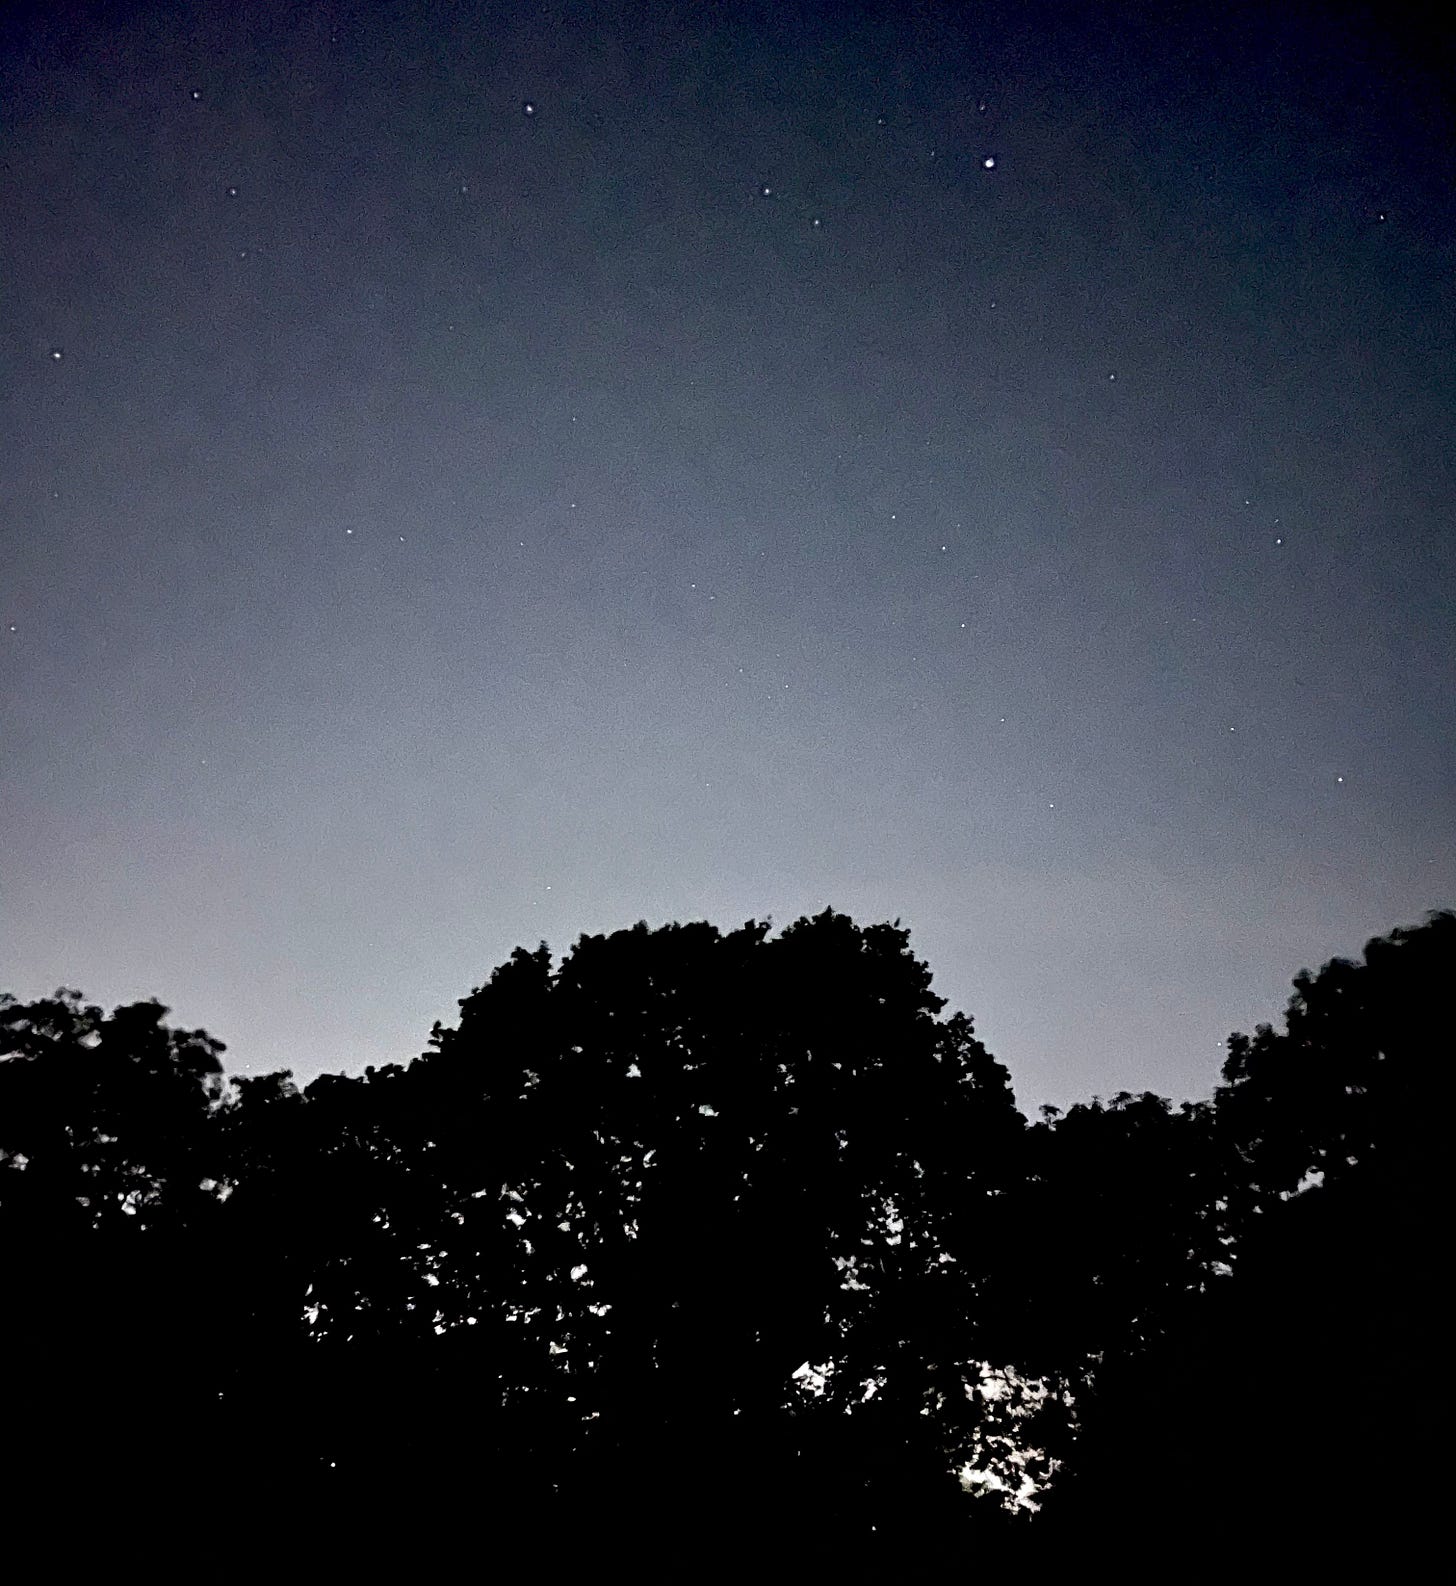 A blurry photo of the night sky above silhouetted trees in Hampstead Heath, London